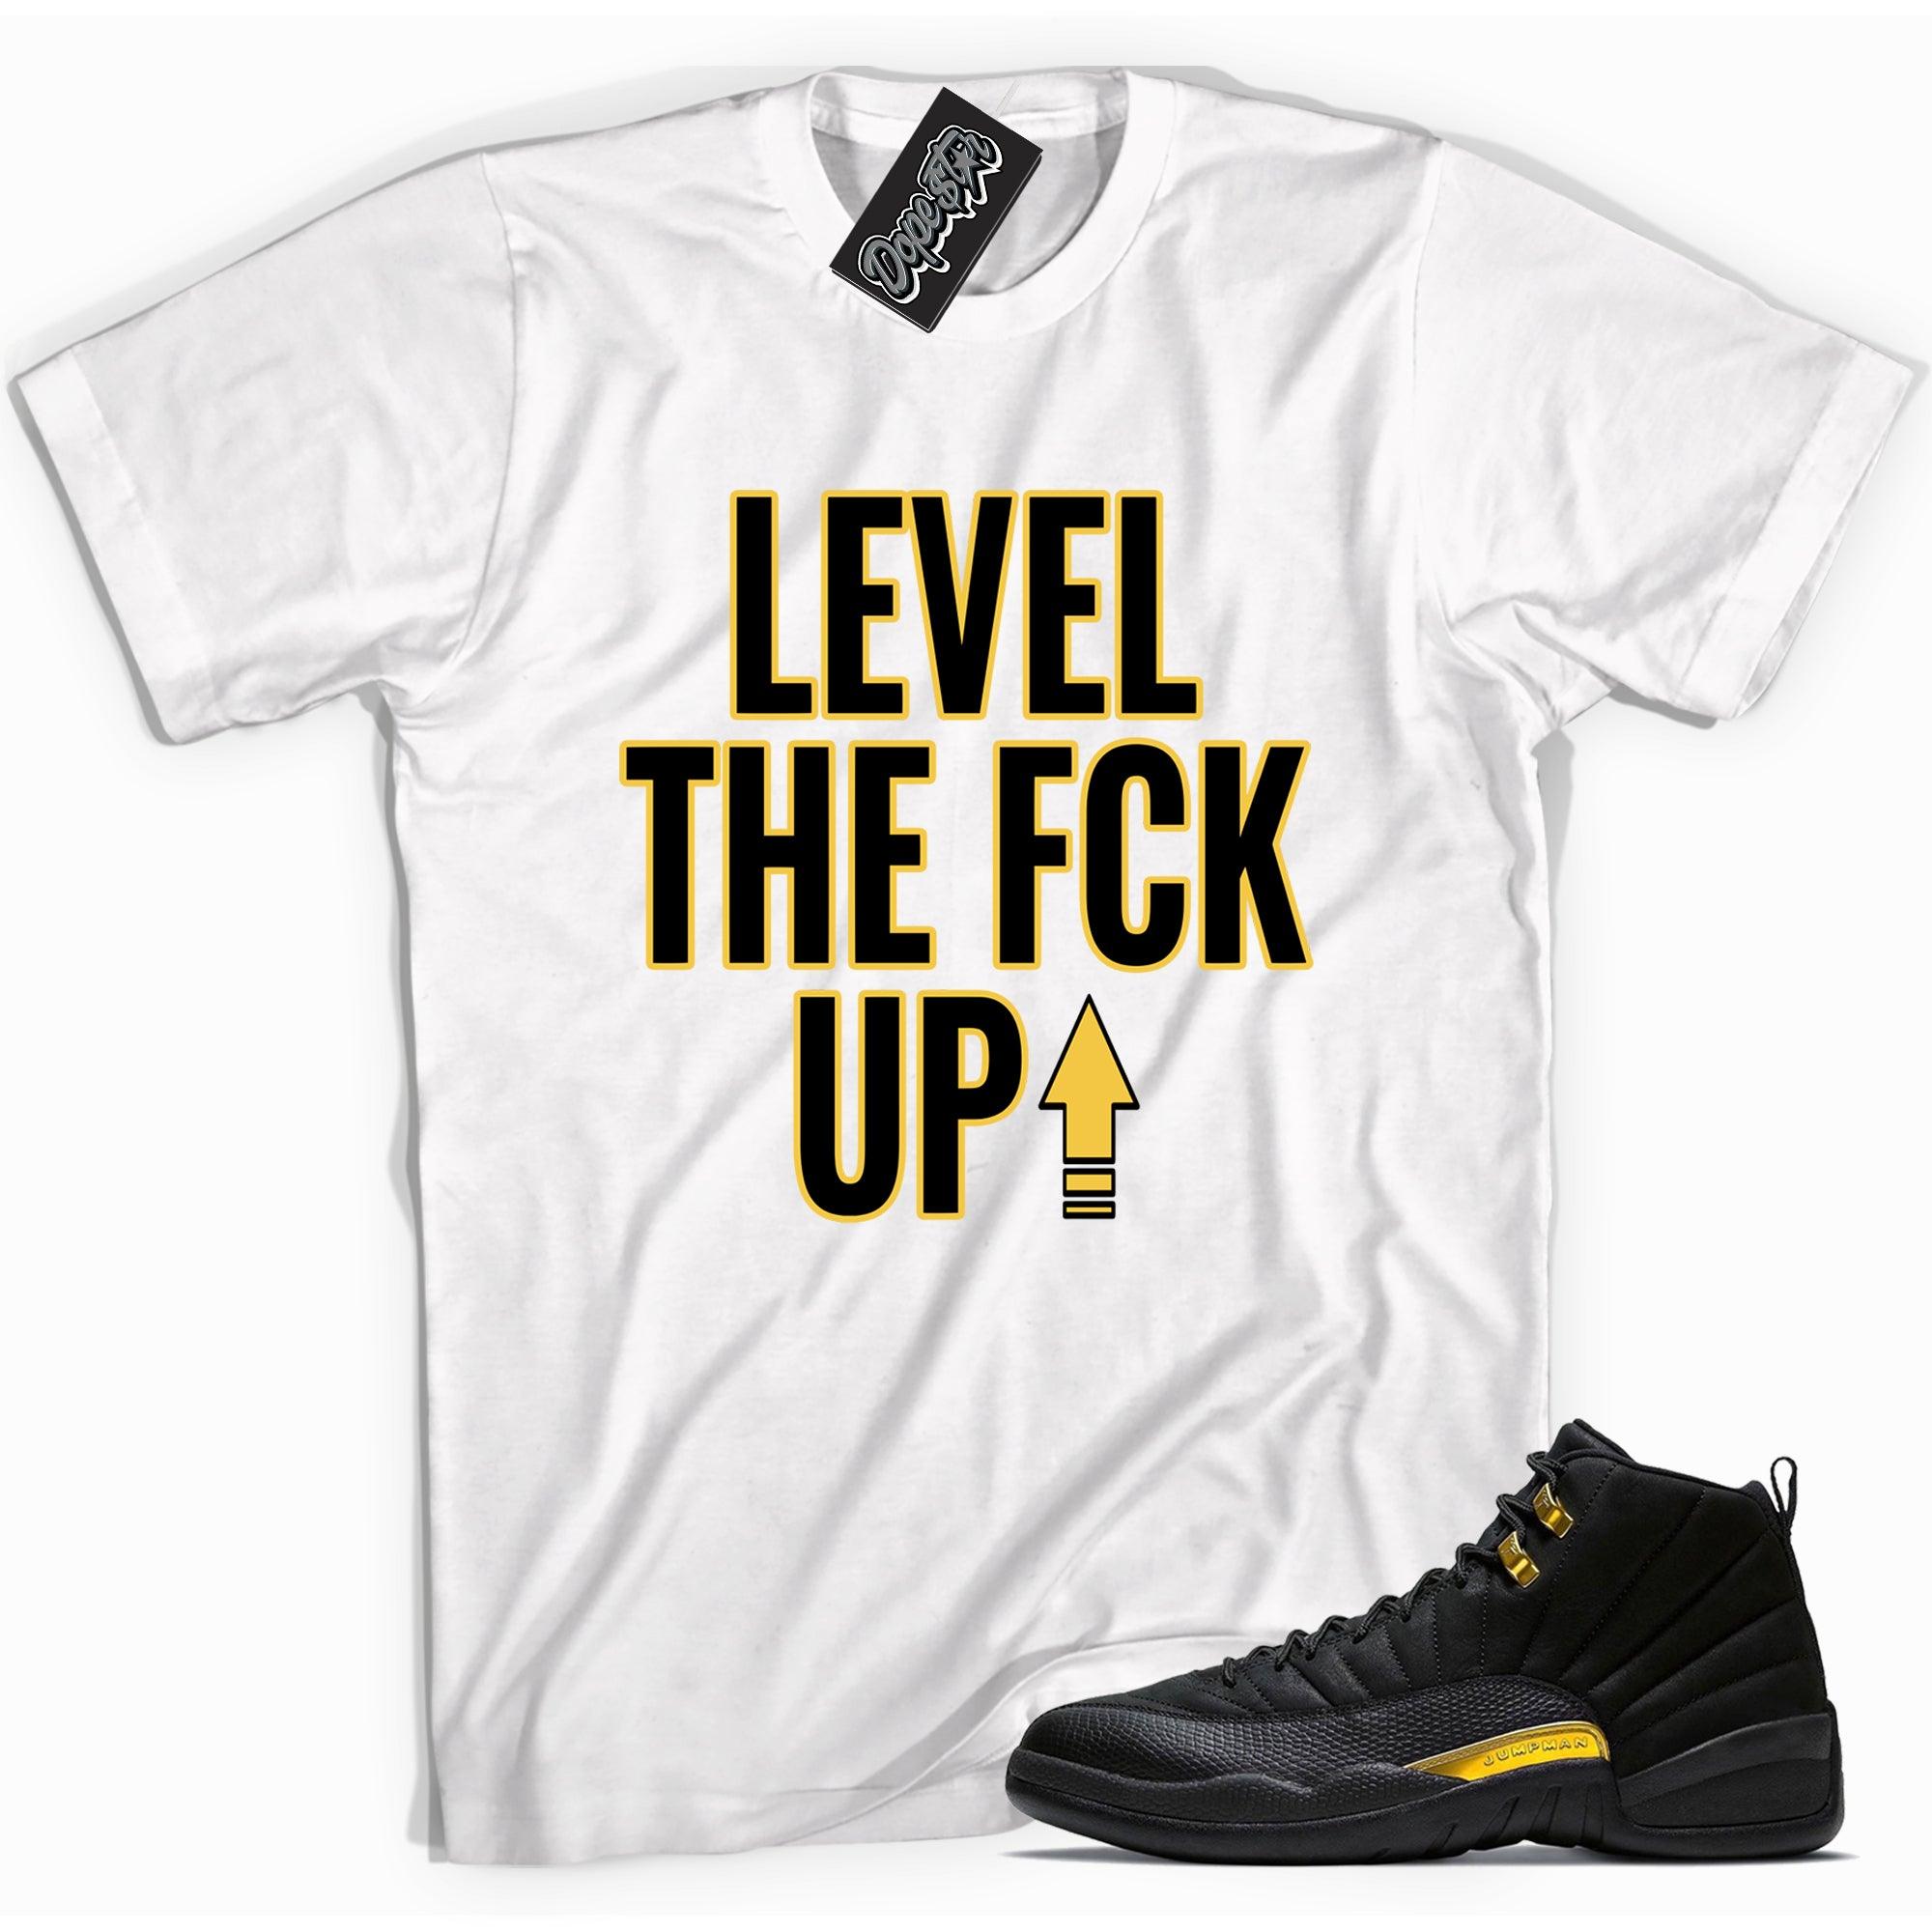 Cool white graphic tee with 'Level Up' print, that perfectly matches Air Jordan 12 black taxi sneakers.